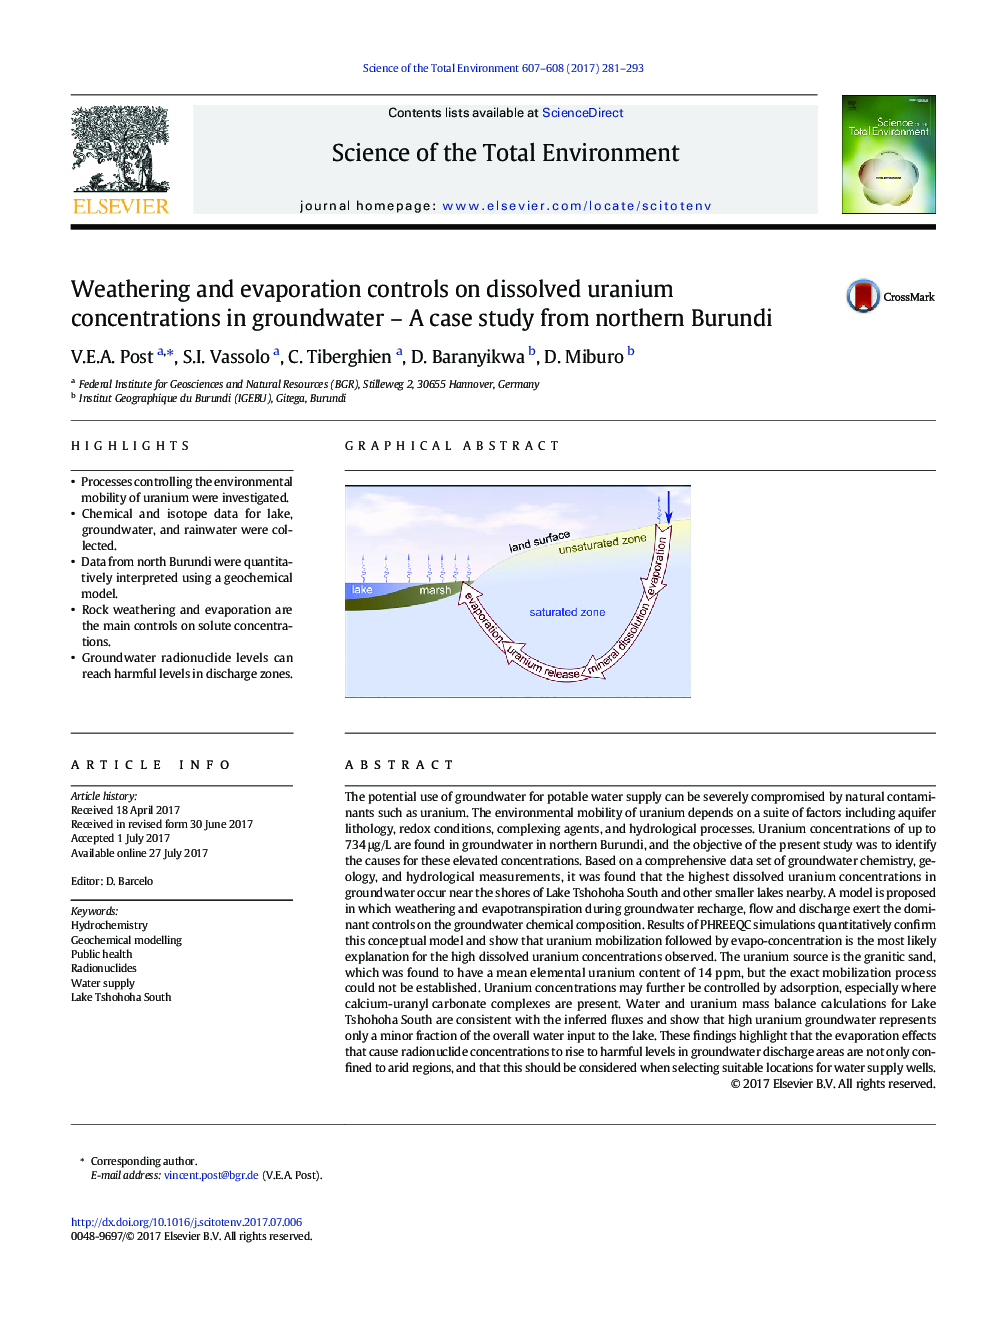 Weathering and evaporation controls on dissolved uranium concentrations in groundwater - A case study from northern Burundi